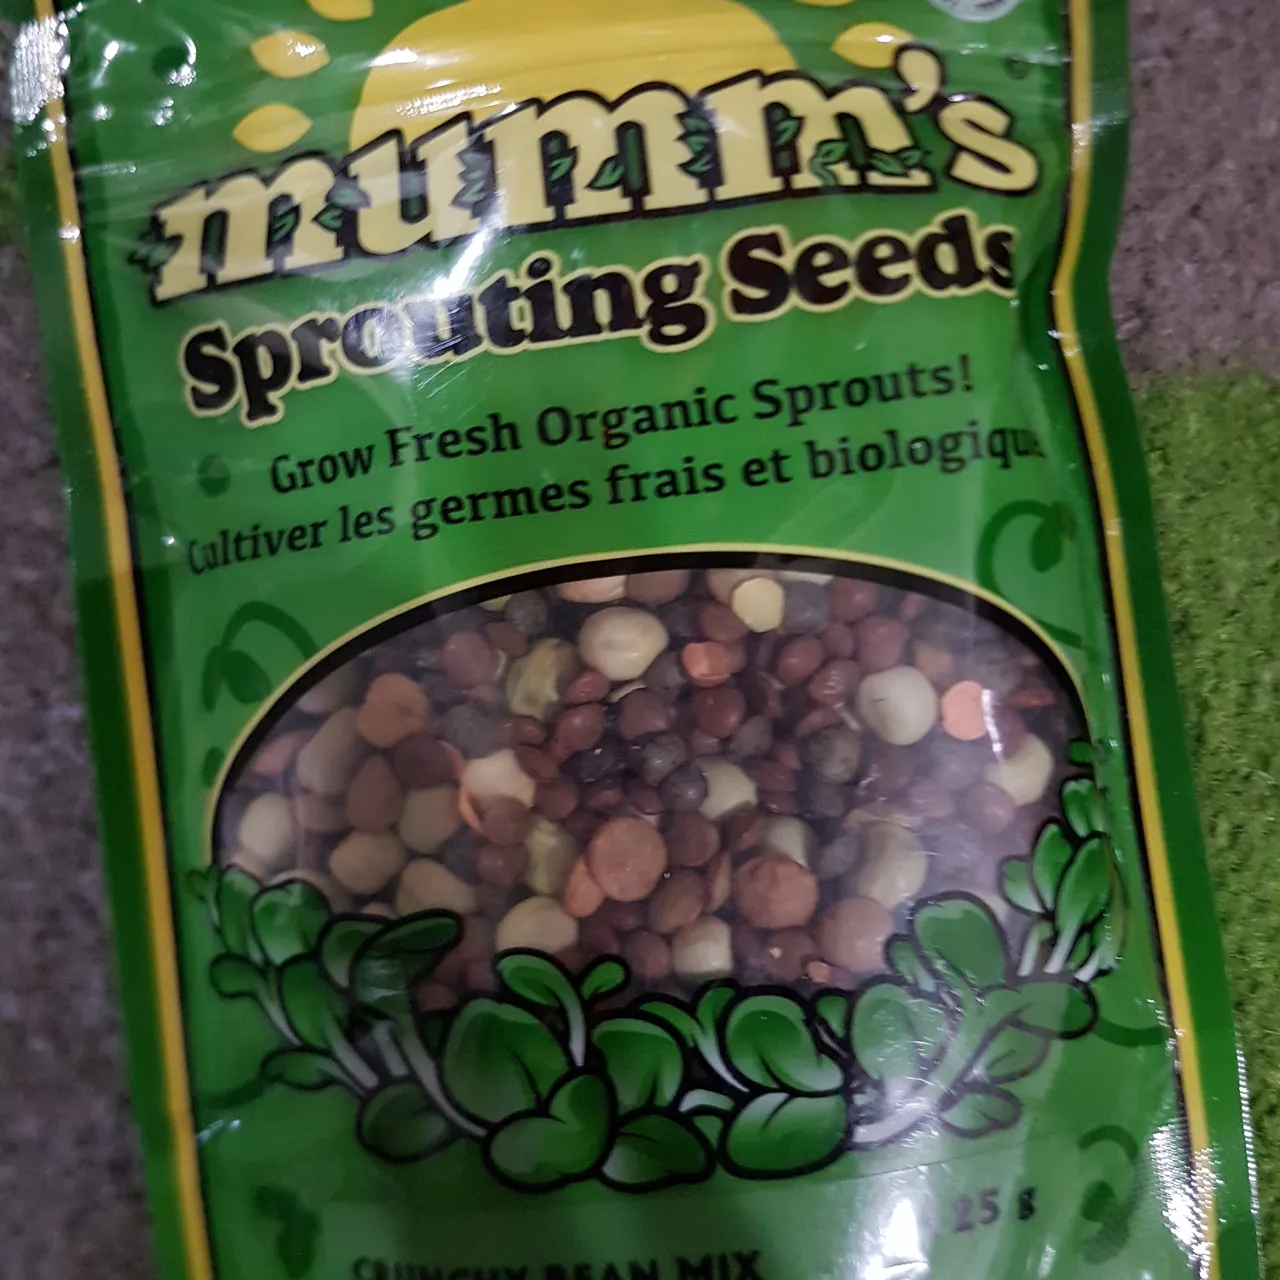 sprouting seeds photo 1